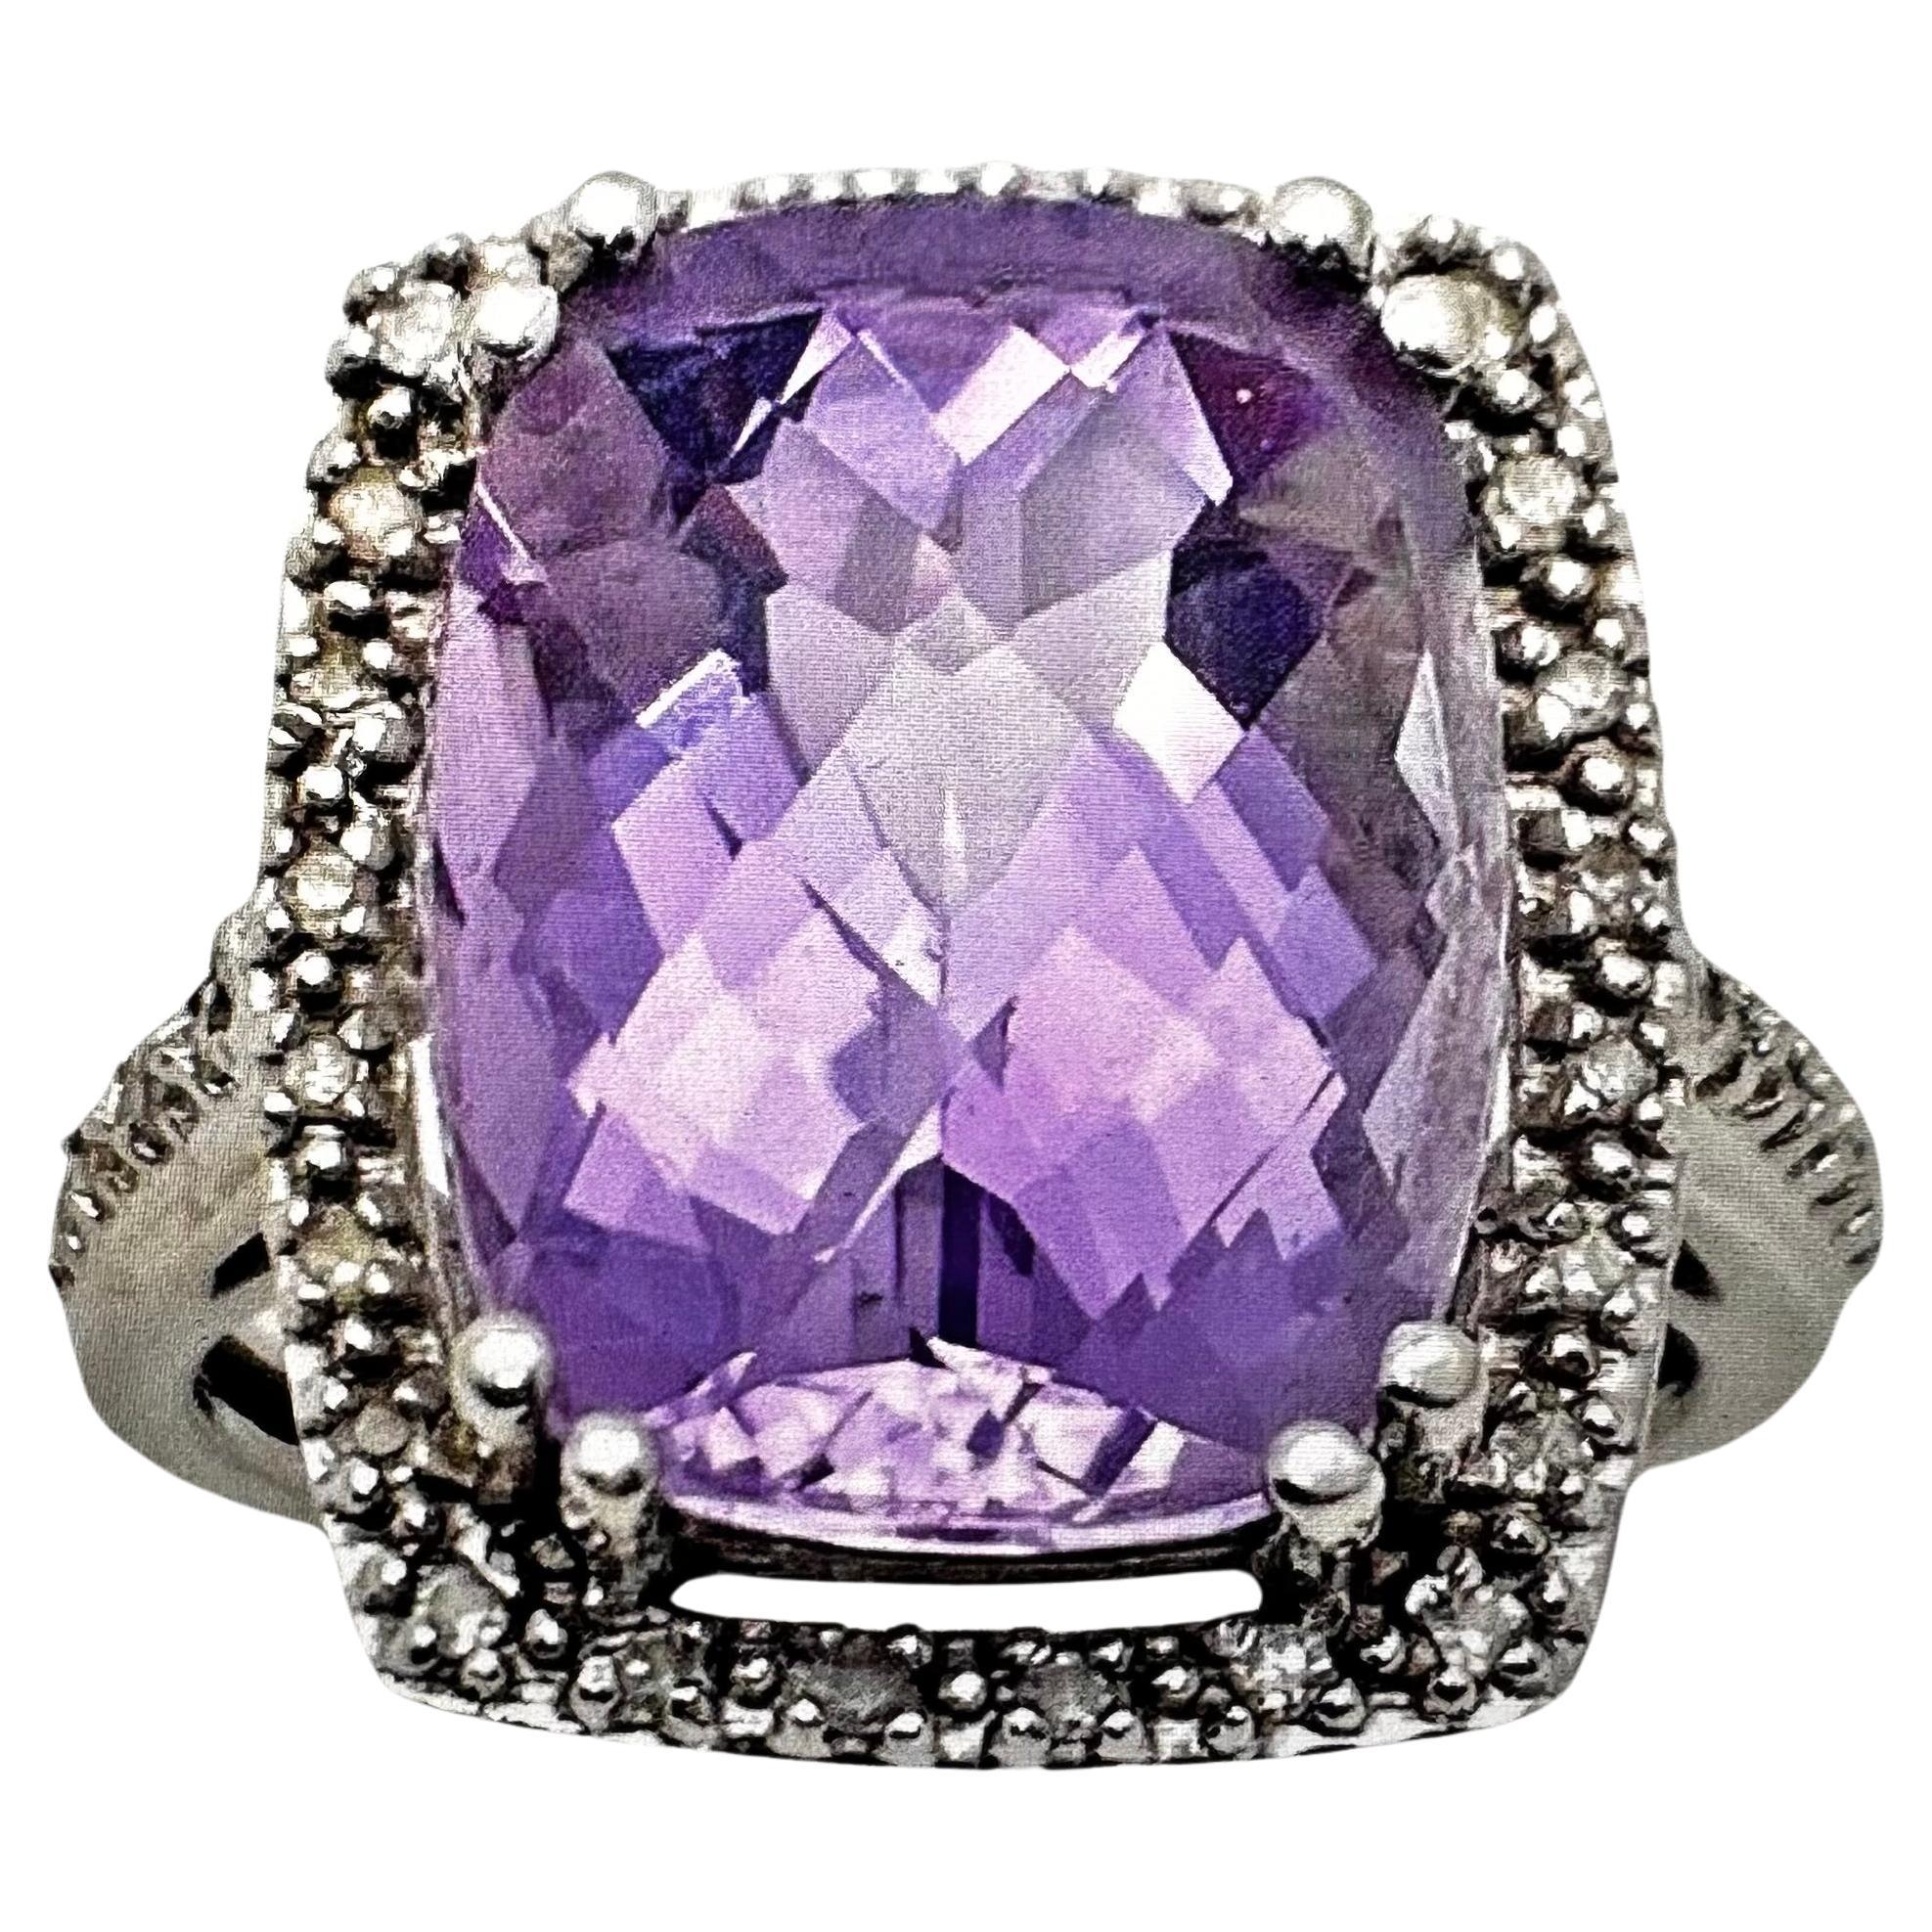 10kt White Gold 11mm x 15mm Cushion Cut Amethyst and Diamond Ring Size 6 3/4